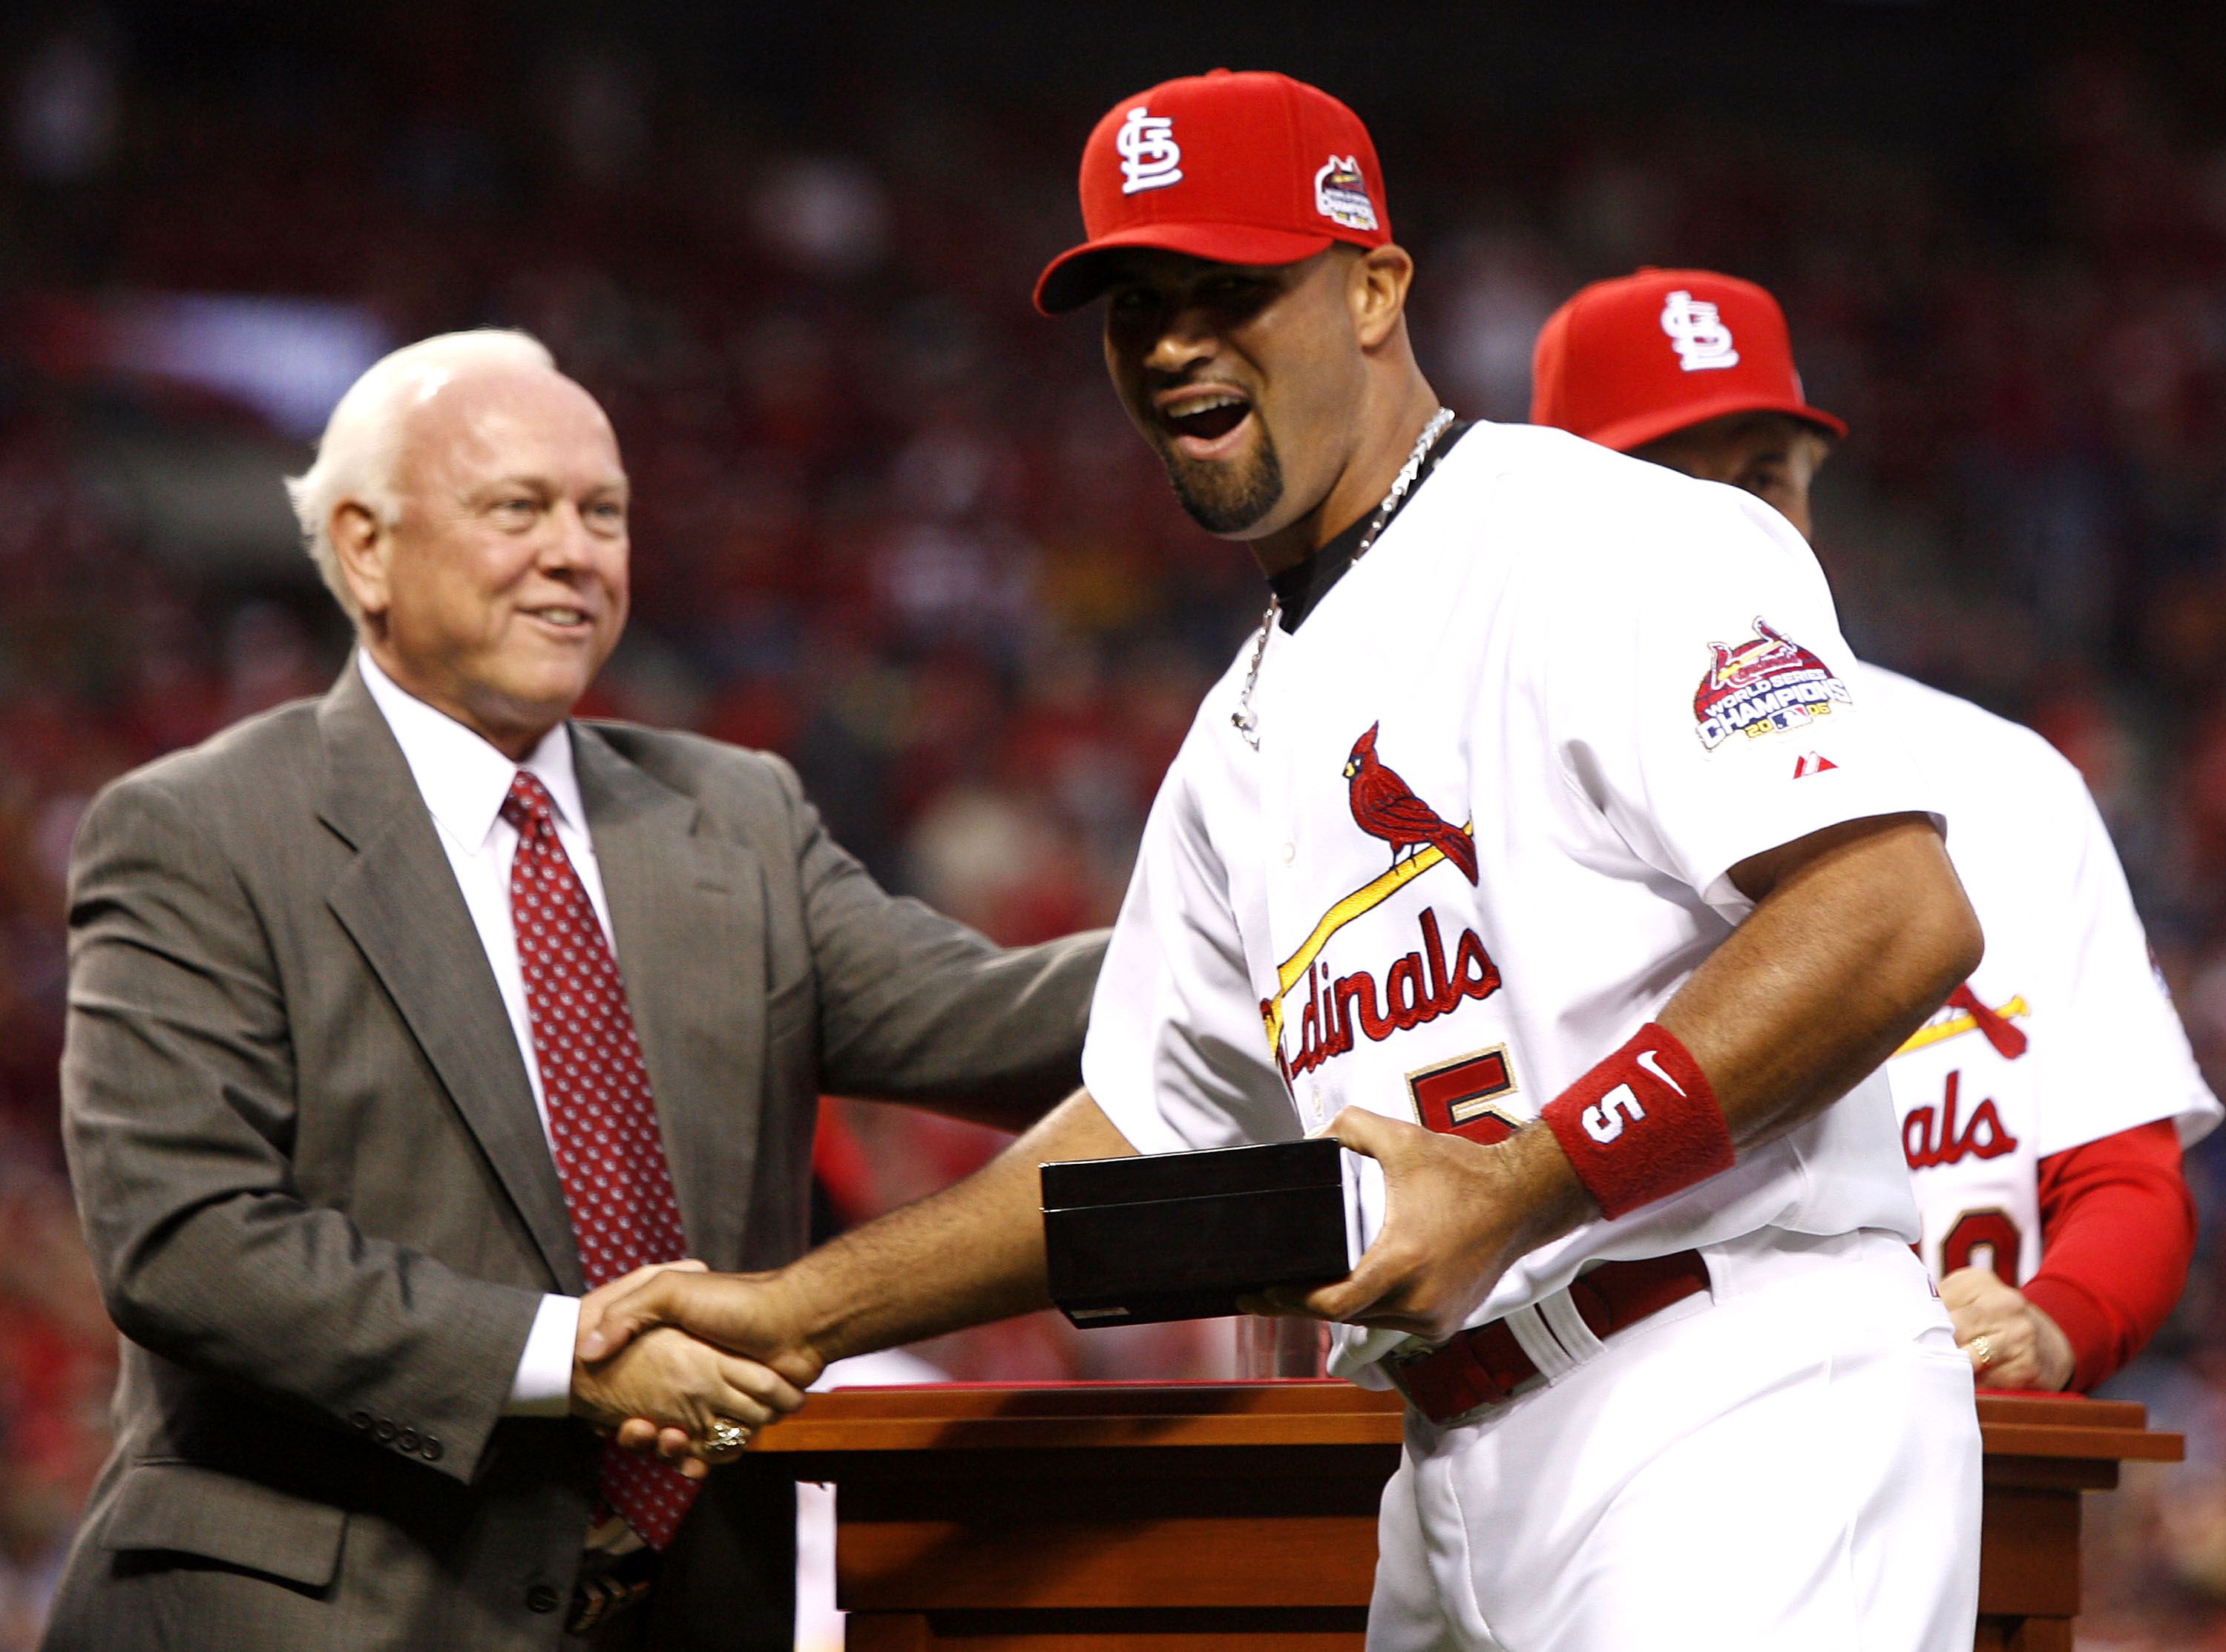 ST. LOUIS, MO - APRIL 3:  General Manager Walt Jocketty presents Albert Pujols #5 of the St. Louis Cardinals with his 2006 World Series Championship ring before playing the New York Mets at Busch Stadium April 3, 2007 in St. Louis, Missouri.  (Photo by Di